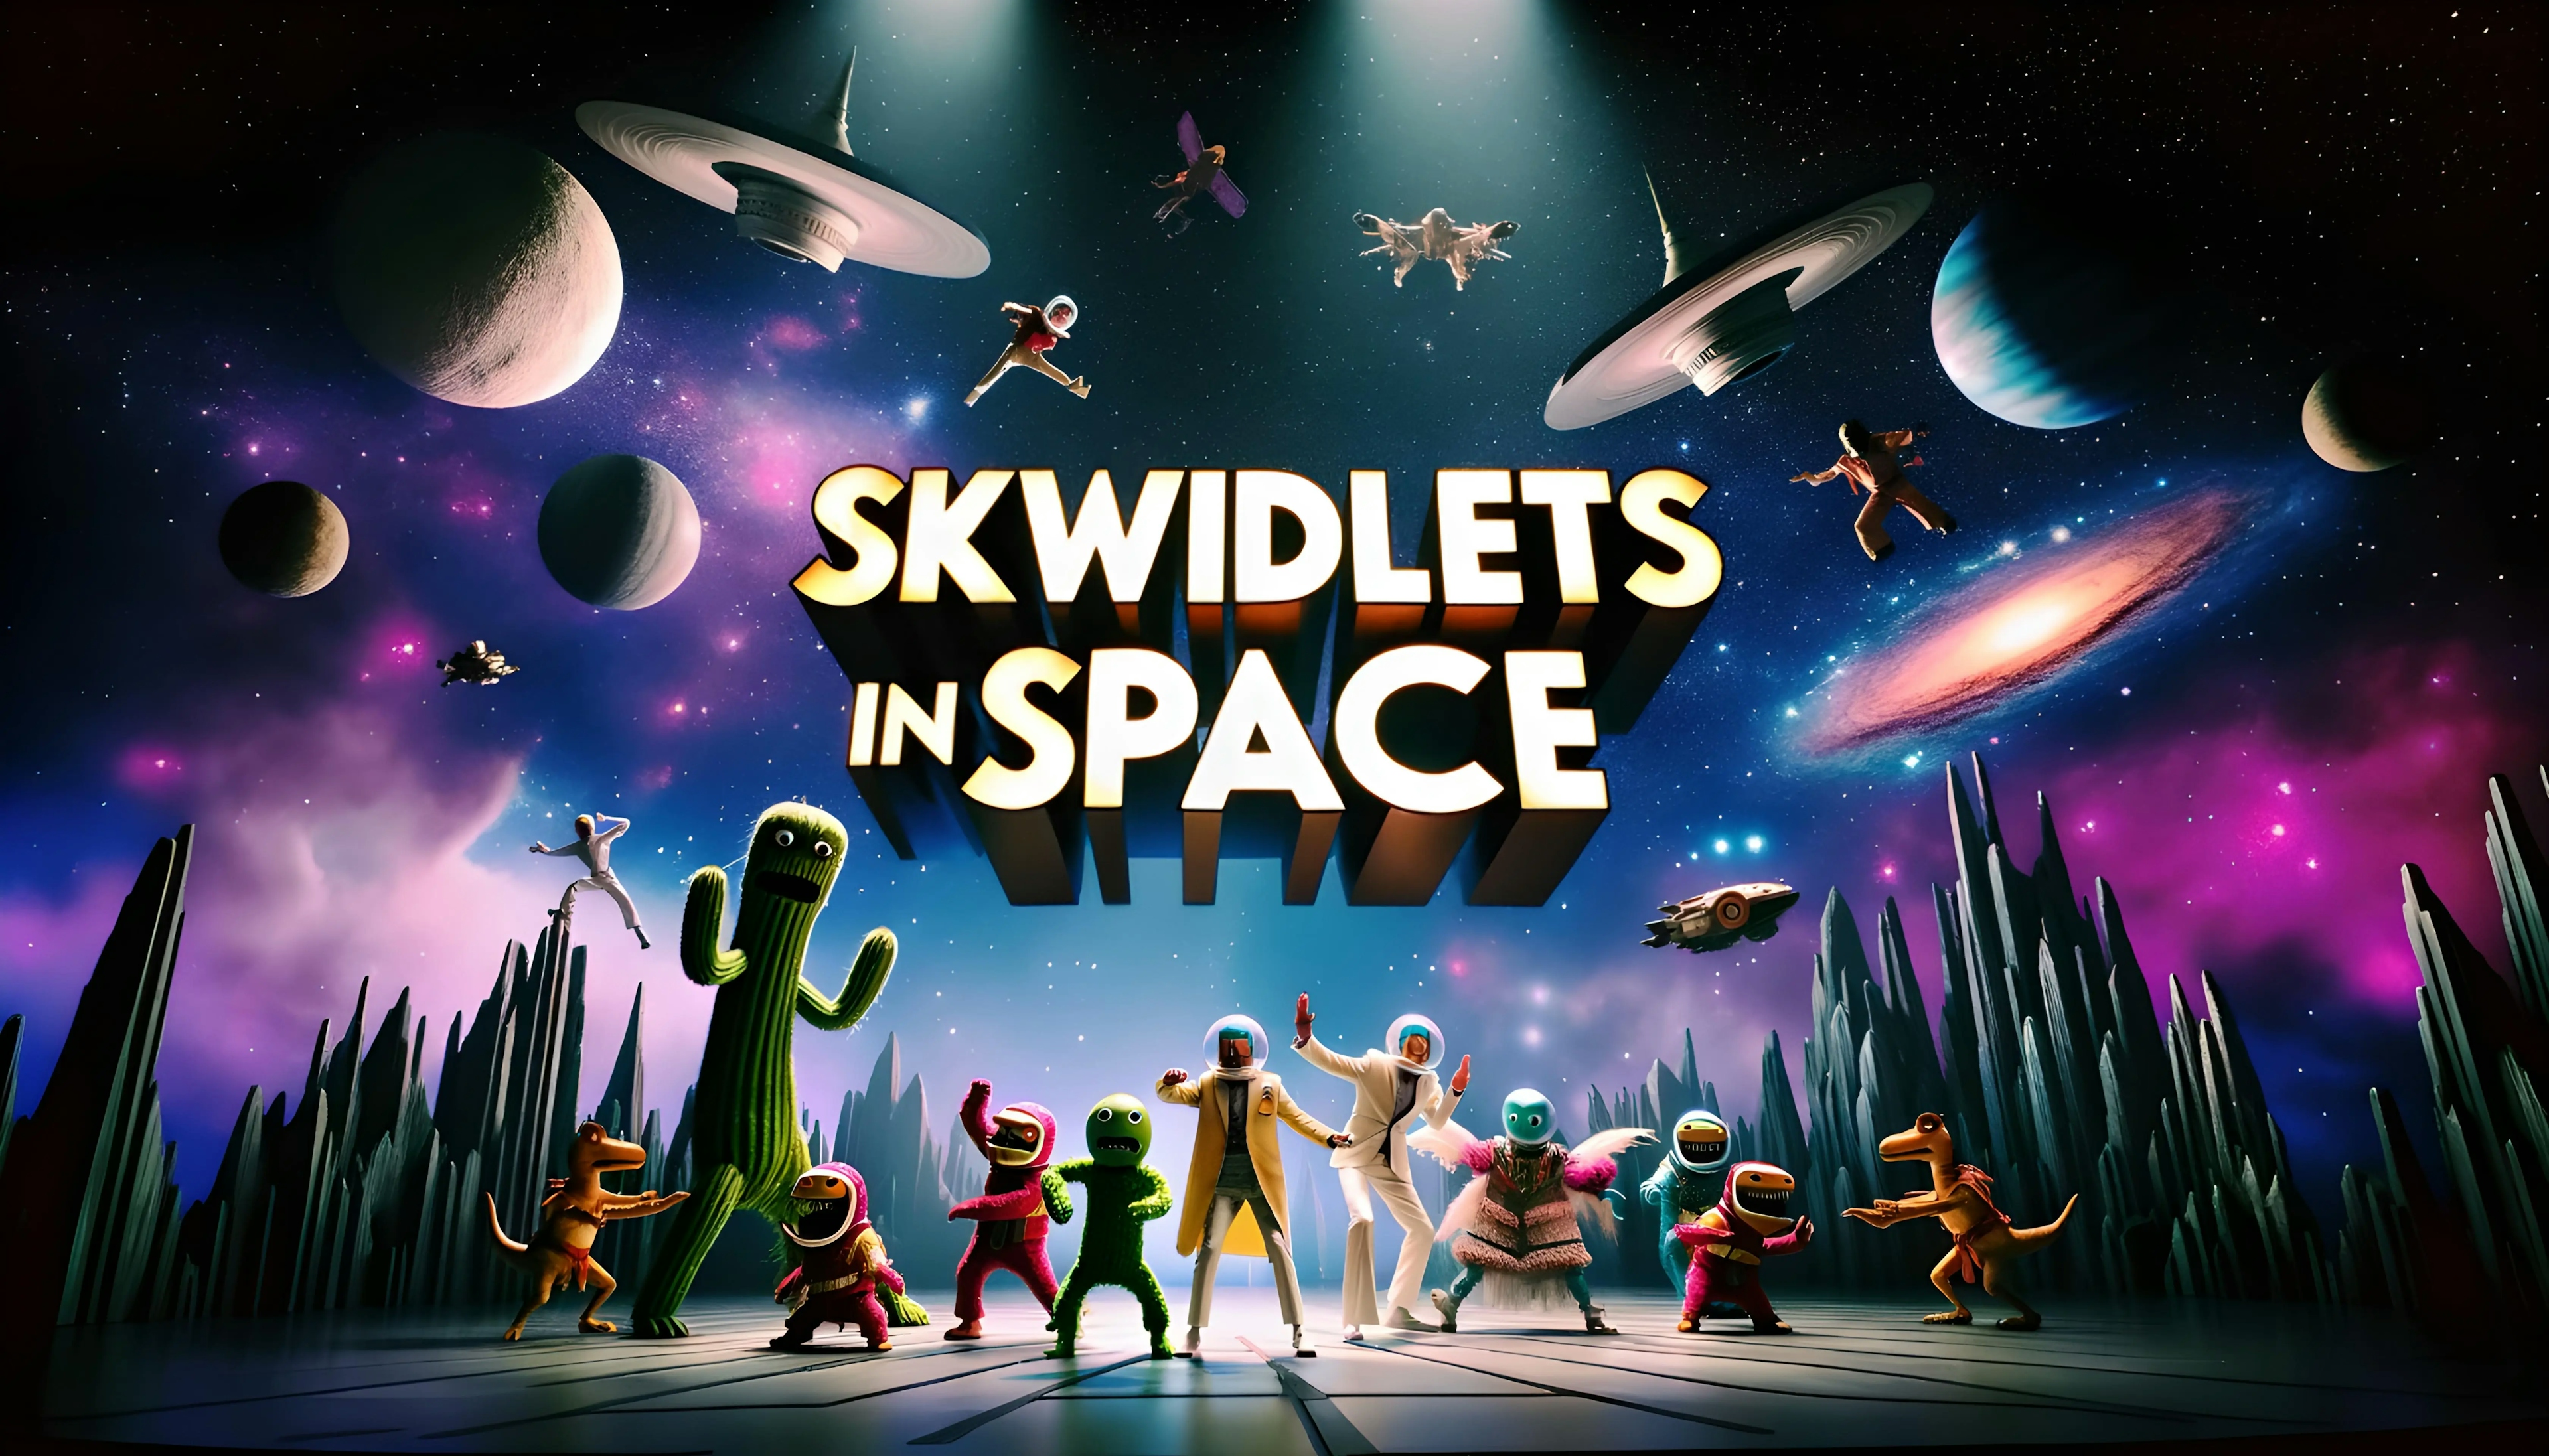 Skwidlets in Space